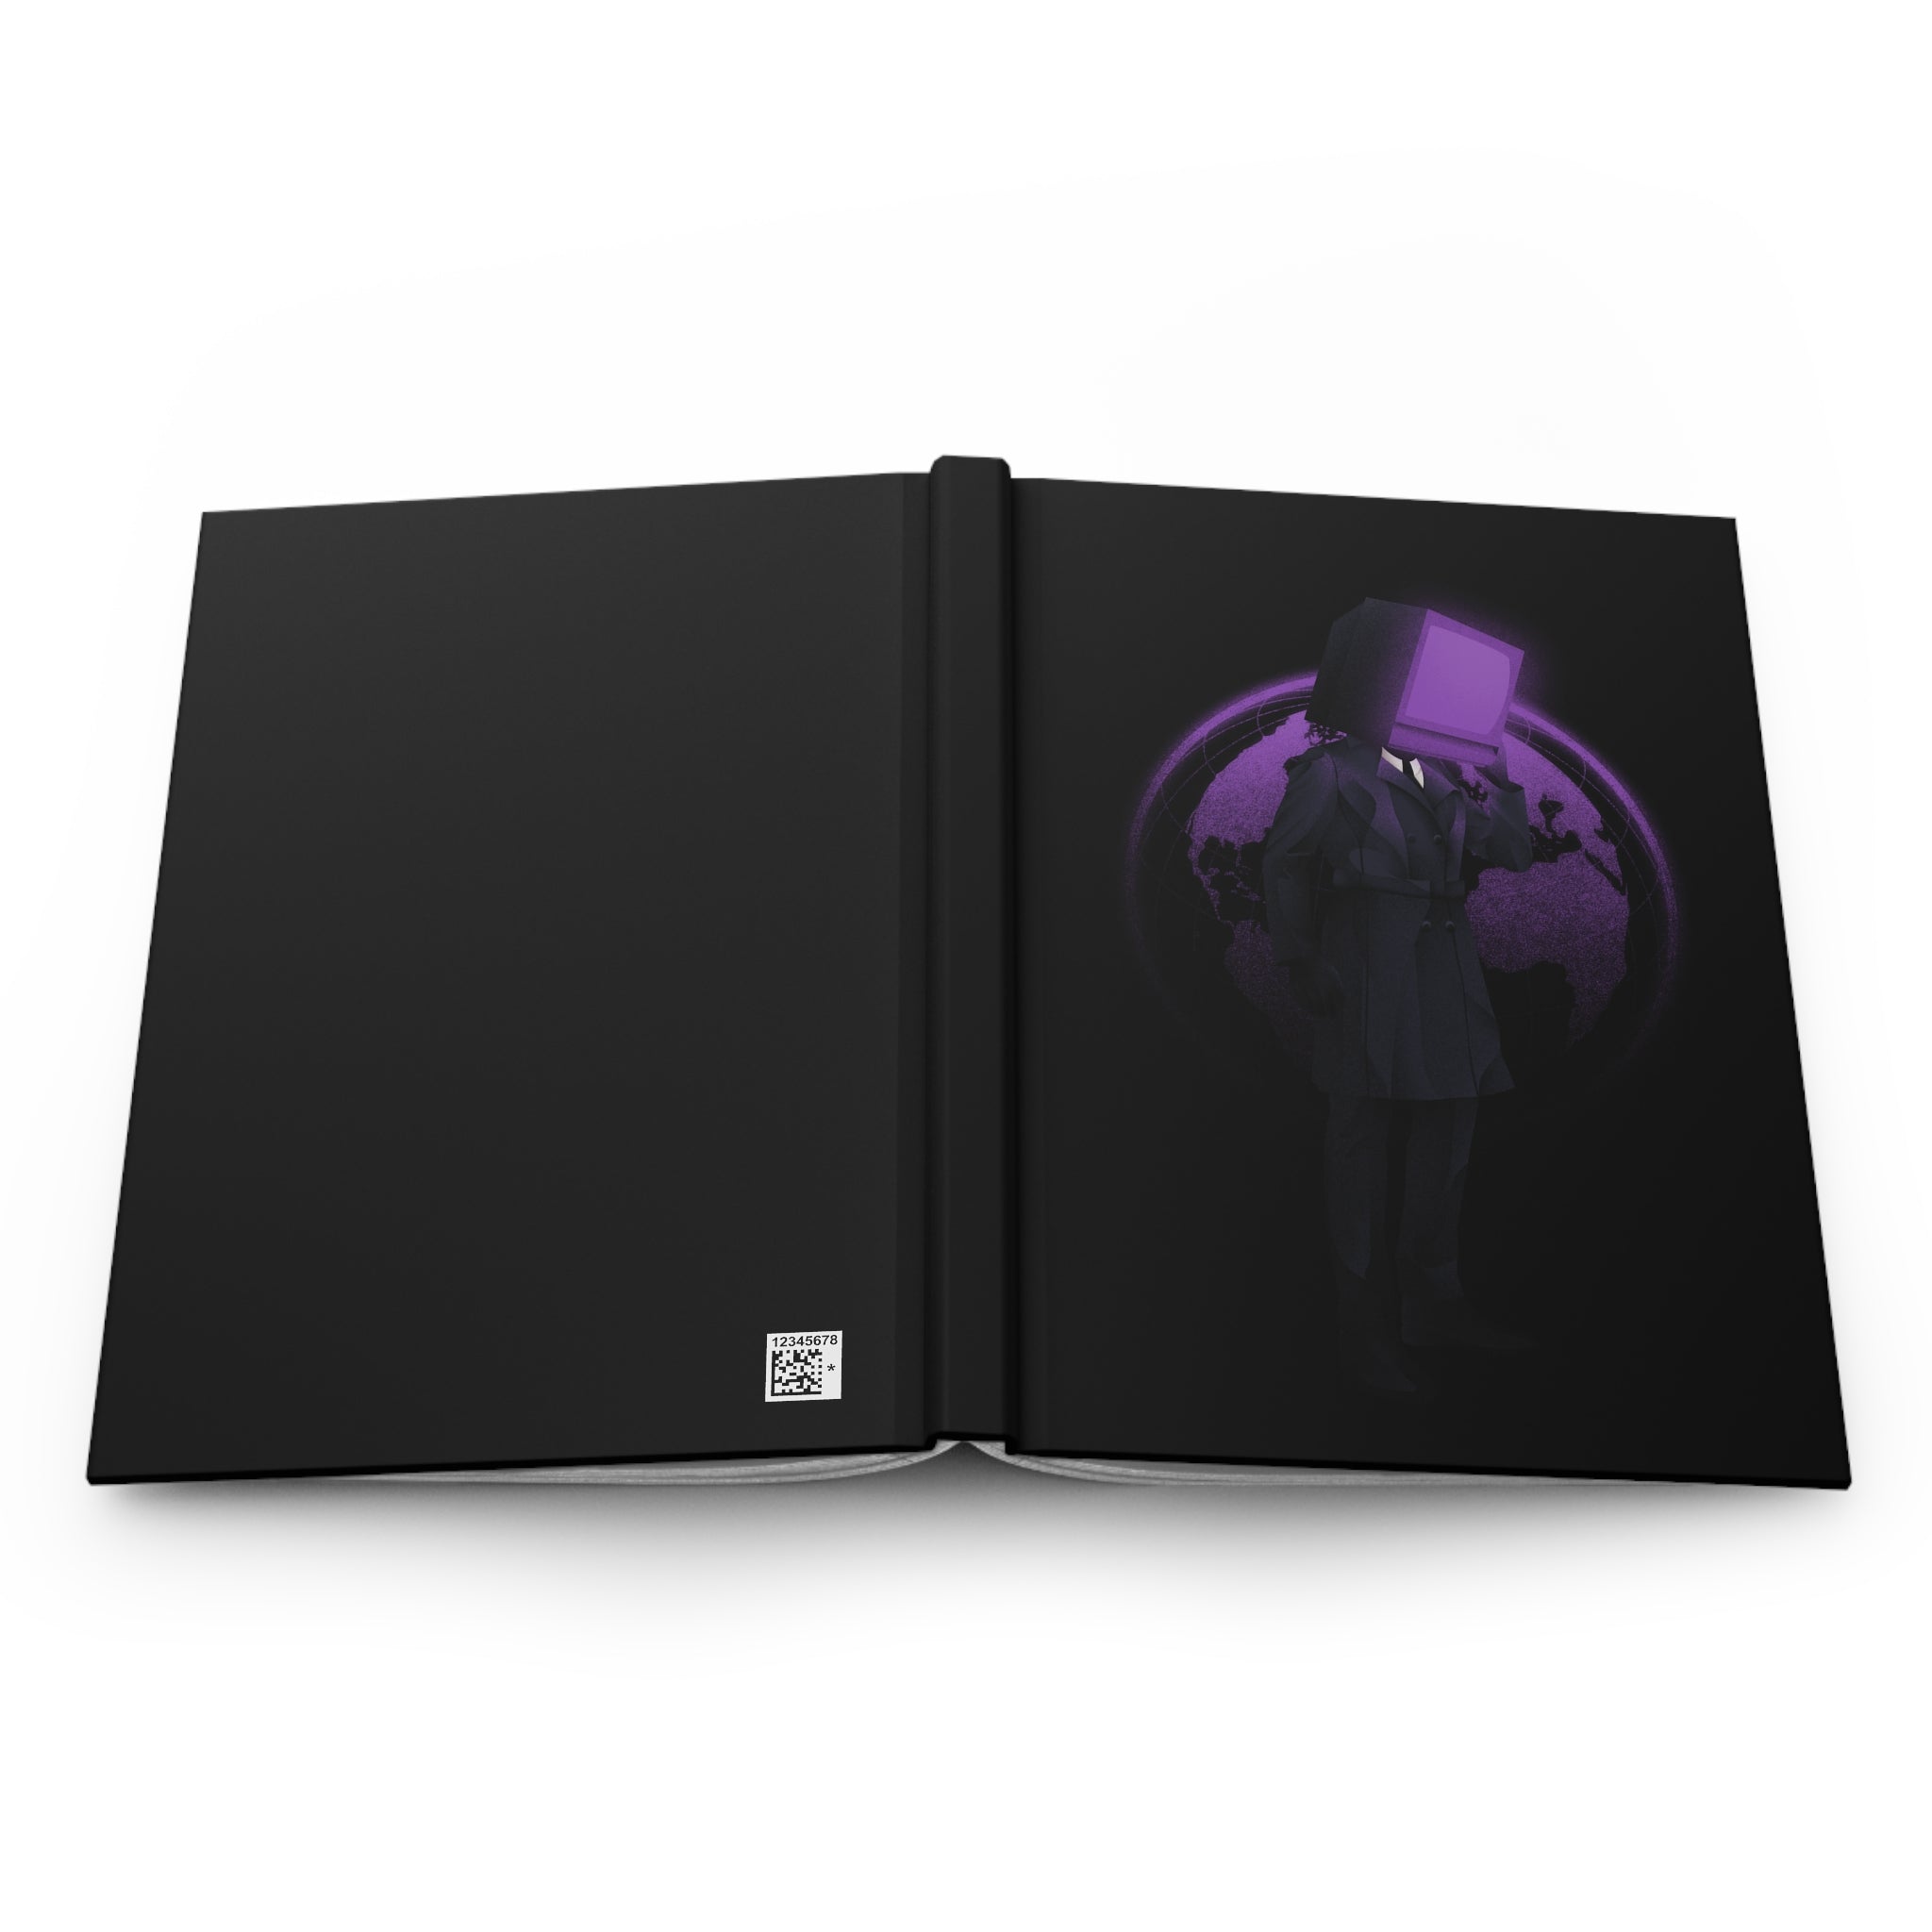 Black journal with TV Man looking over a purple world, front and back cover